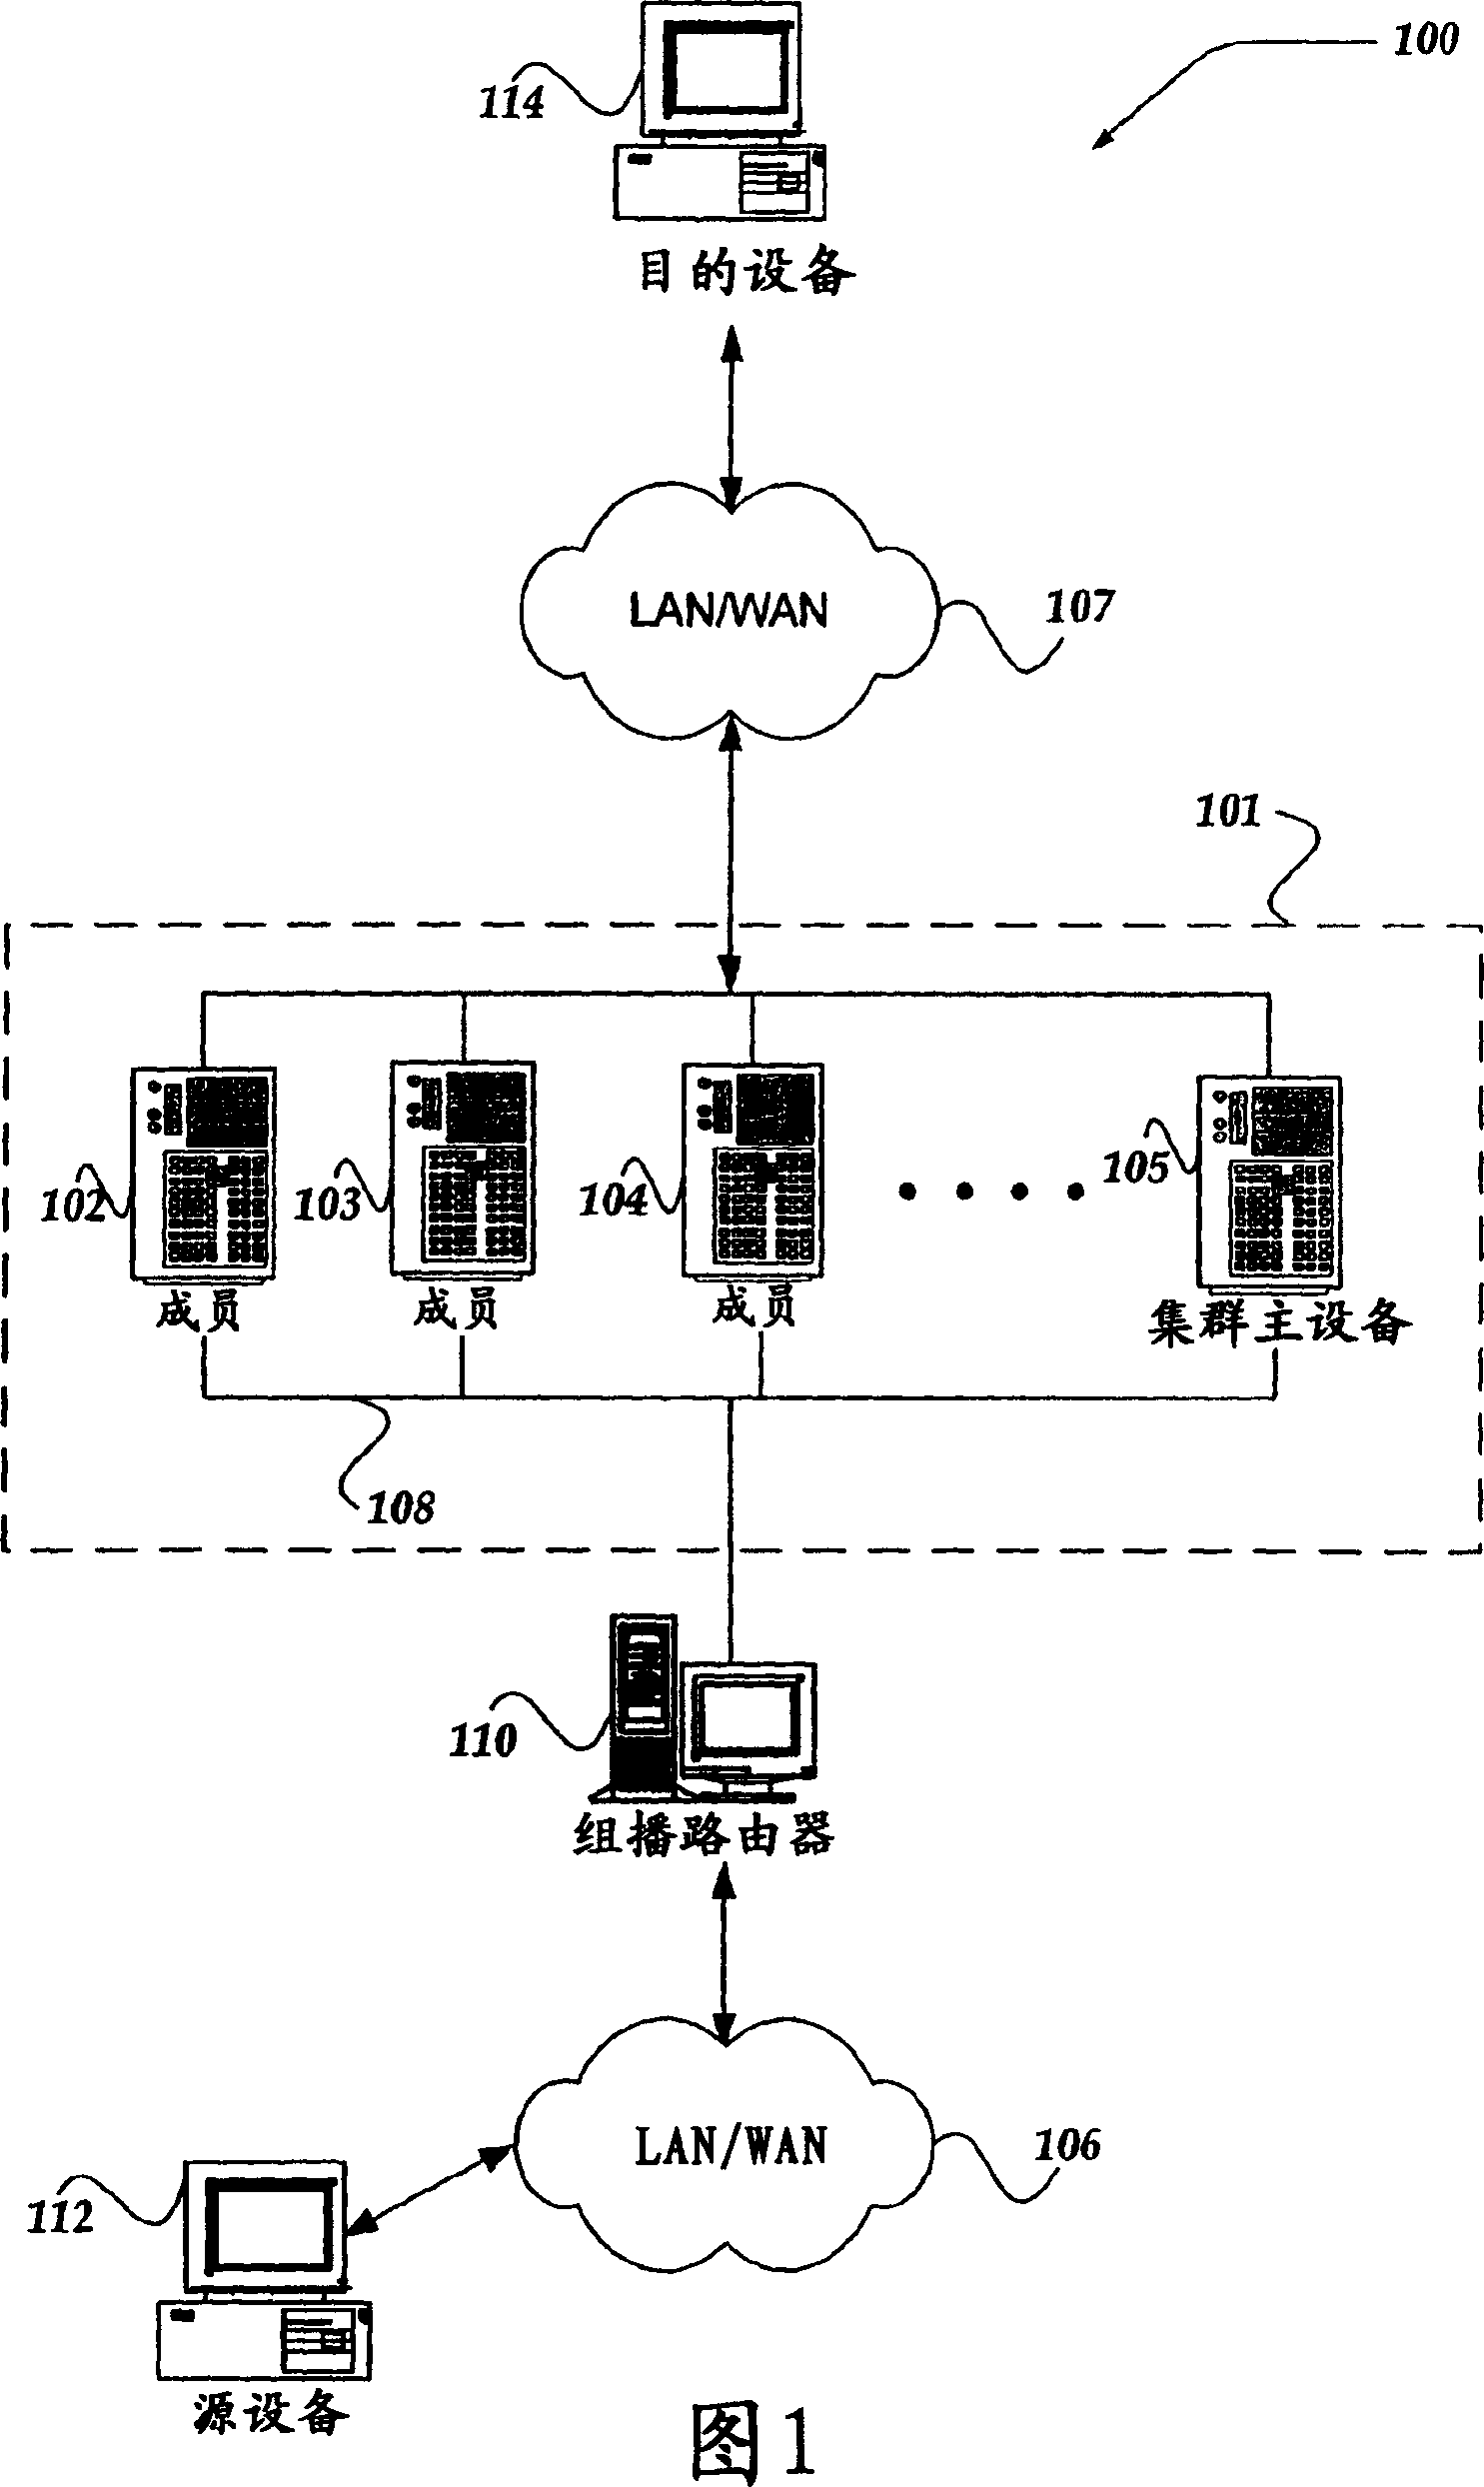 Virtual multicast routing for a cluster having state synchronization